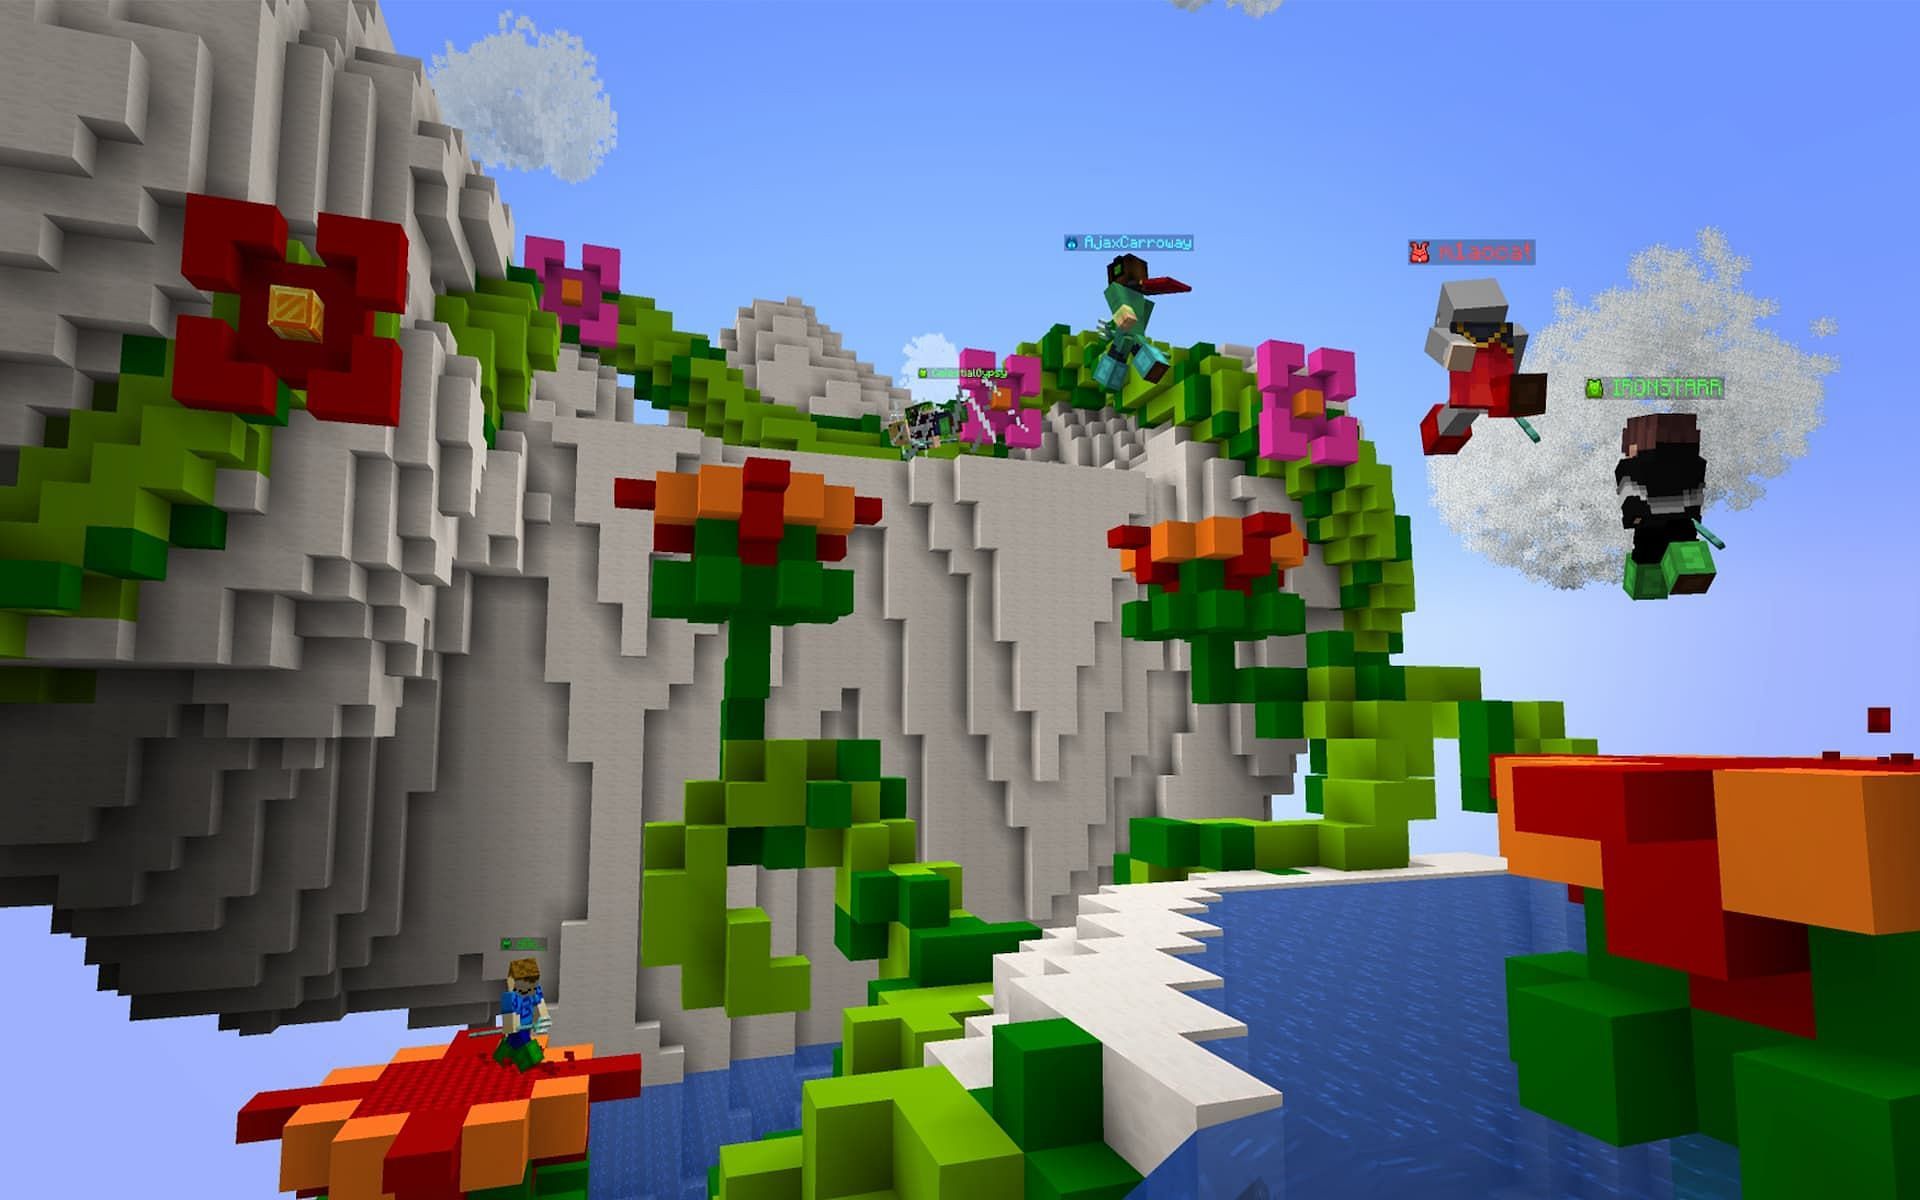 Fans can tune in to watch the Minecraft Championship (MCC) 29 (Image via Noxcrew)